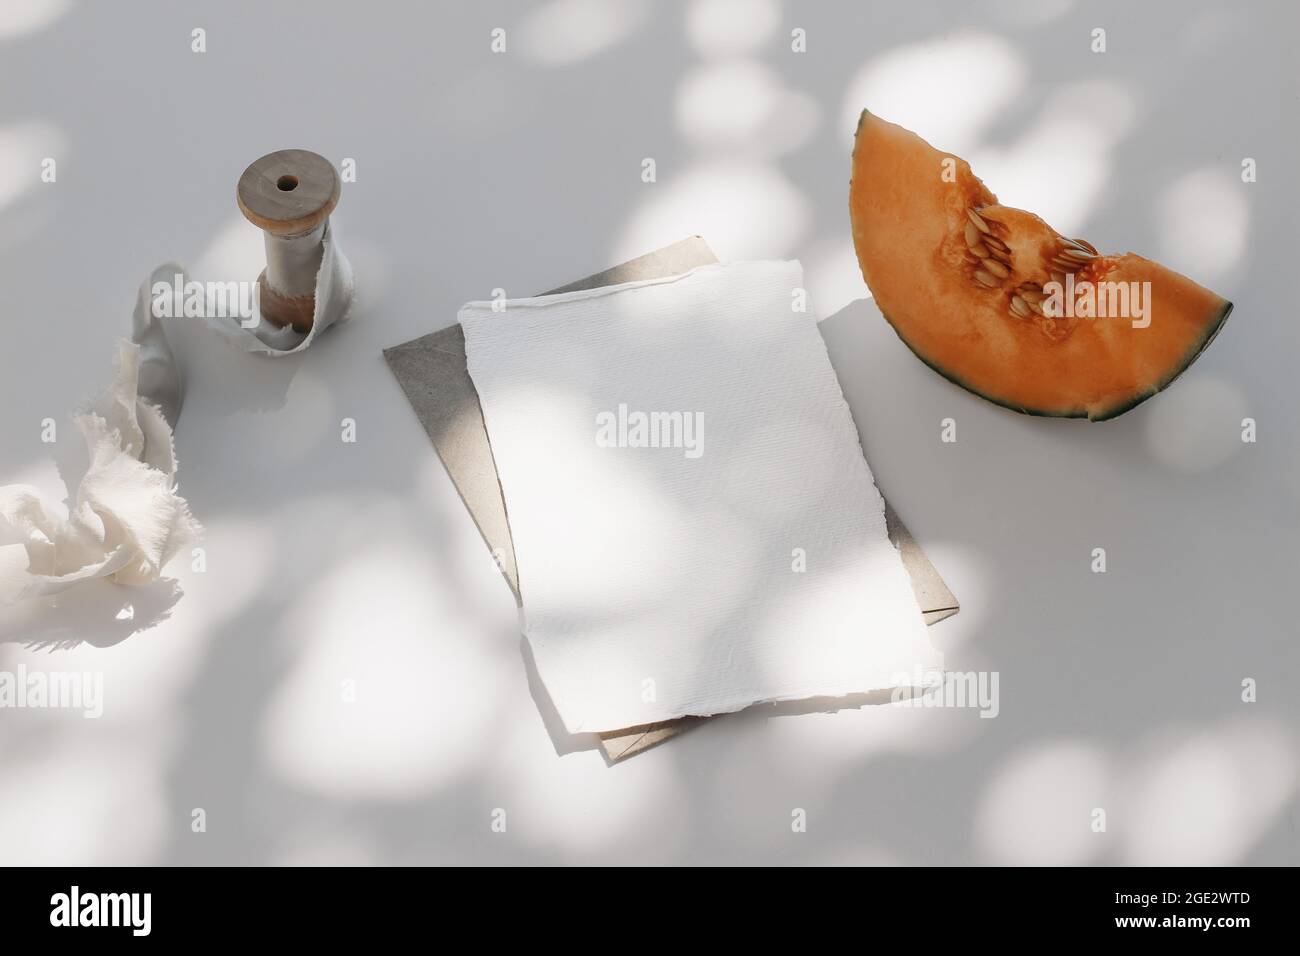 Summer food still life composition. Cantaloupe melon fruit, silk ribbon. White table background with tree shadows overlay. Stationery mock up scene Stock Photo